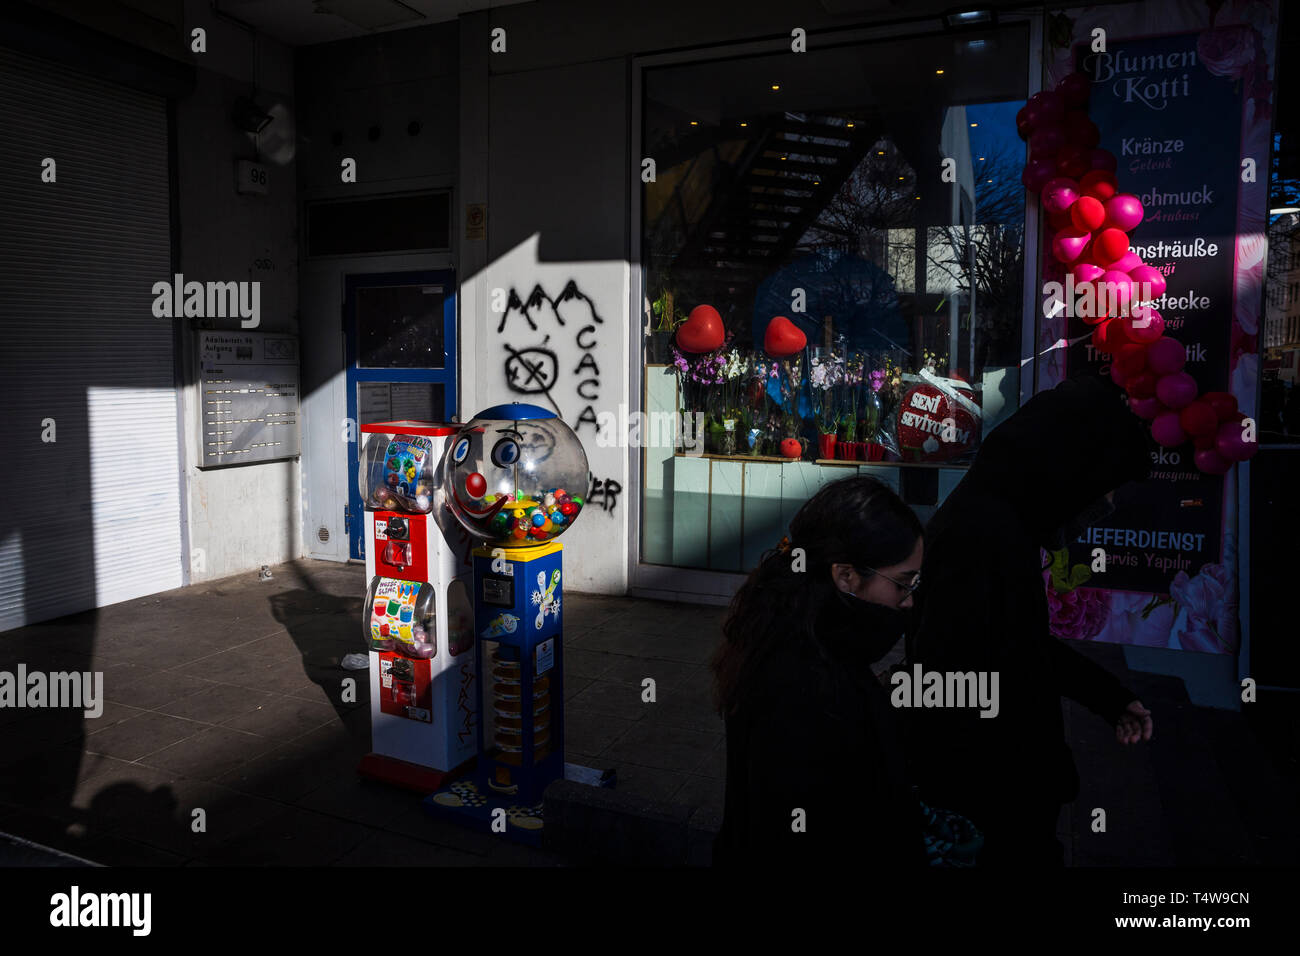 Sweet dispensers and balloons outside a shop in Kottbusser Tor, Berlin, Germany. Stock Photo